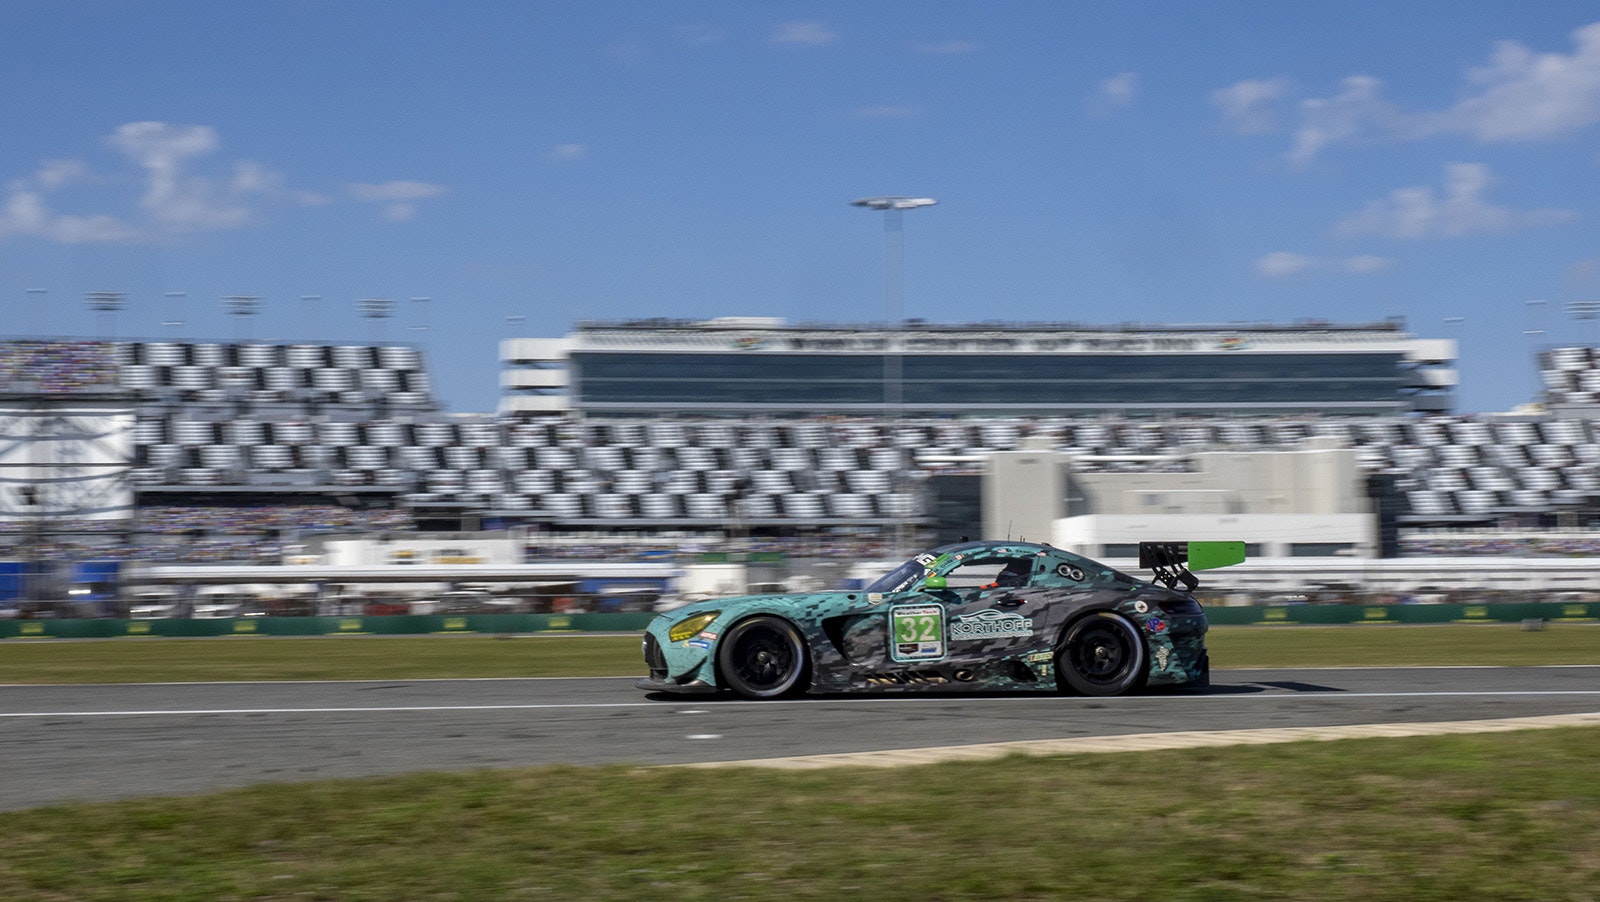 Team Korthoff, the only professional auto racing team based in Wyoming, won the IMSA Michelin Endurance Cup last year in only its second season of racing with its green No. 32 Mercedes AMG GT3 EVO.